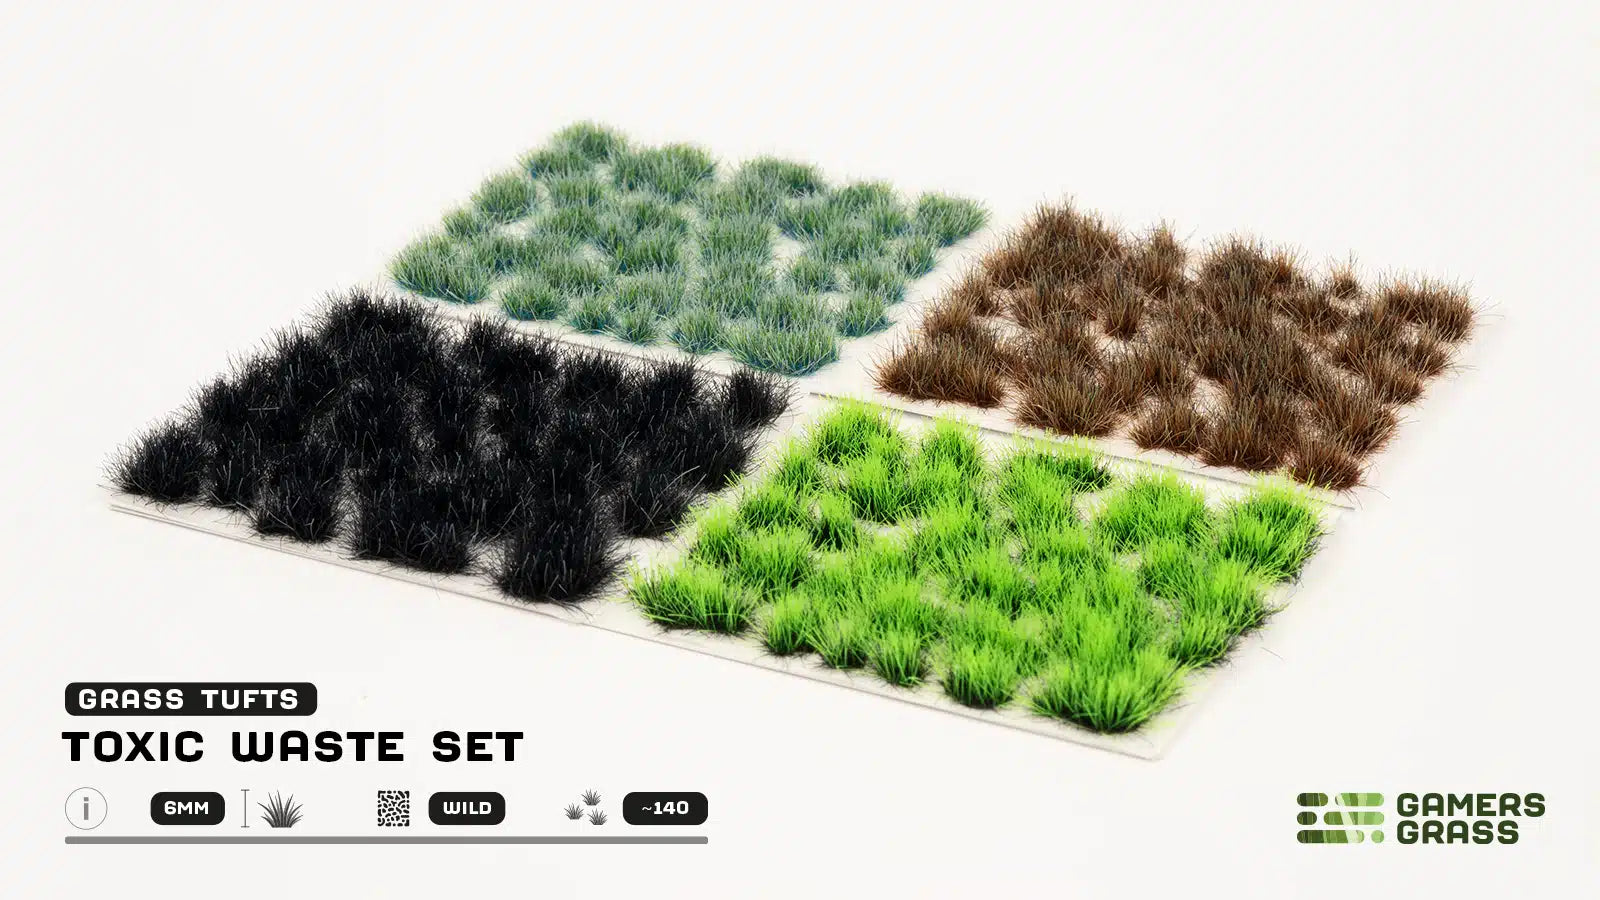 Toxic Waste Set Tufts (Wild) - Gamers Grass